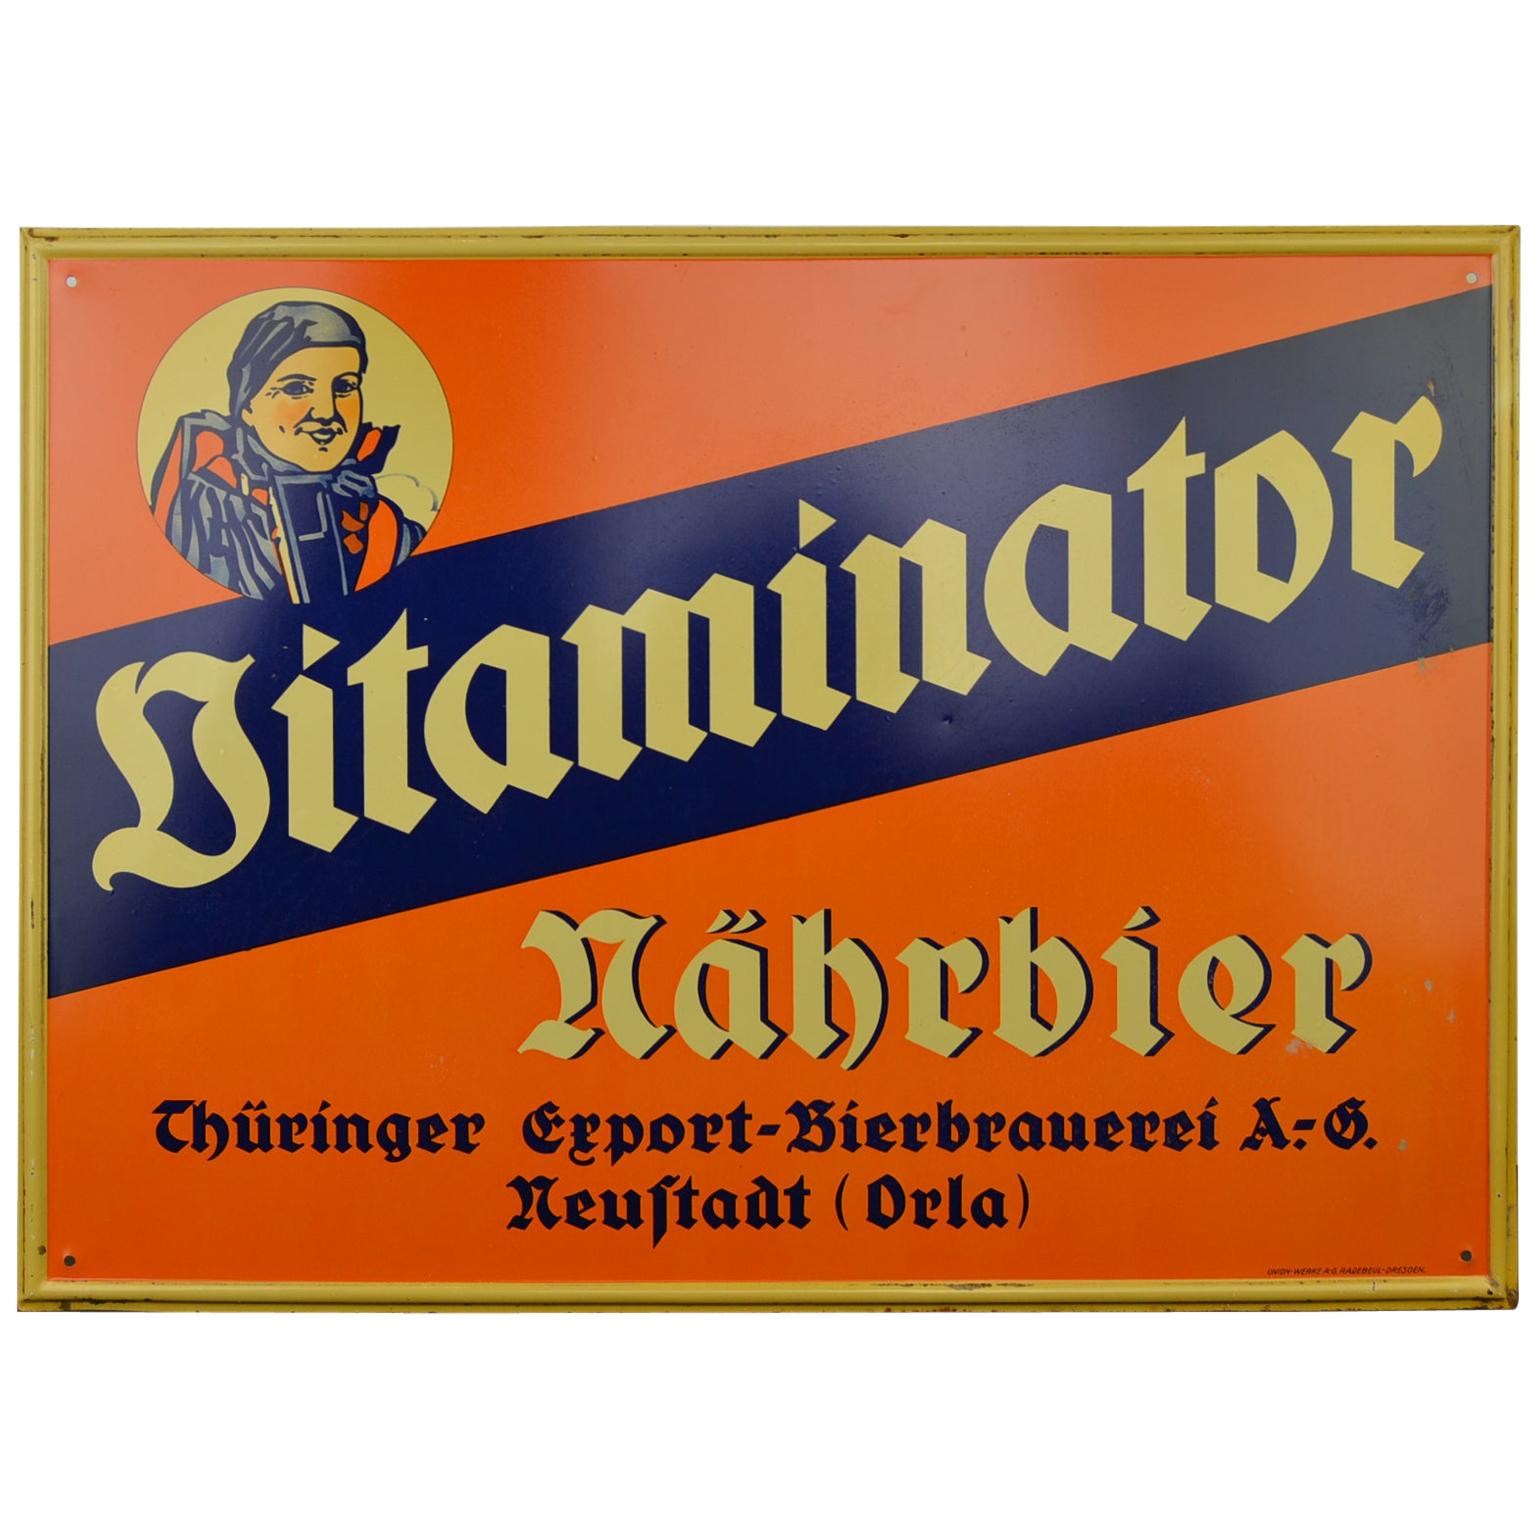 Tin Advertising Beer Sign, Germany, 1940s